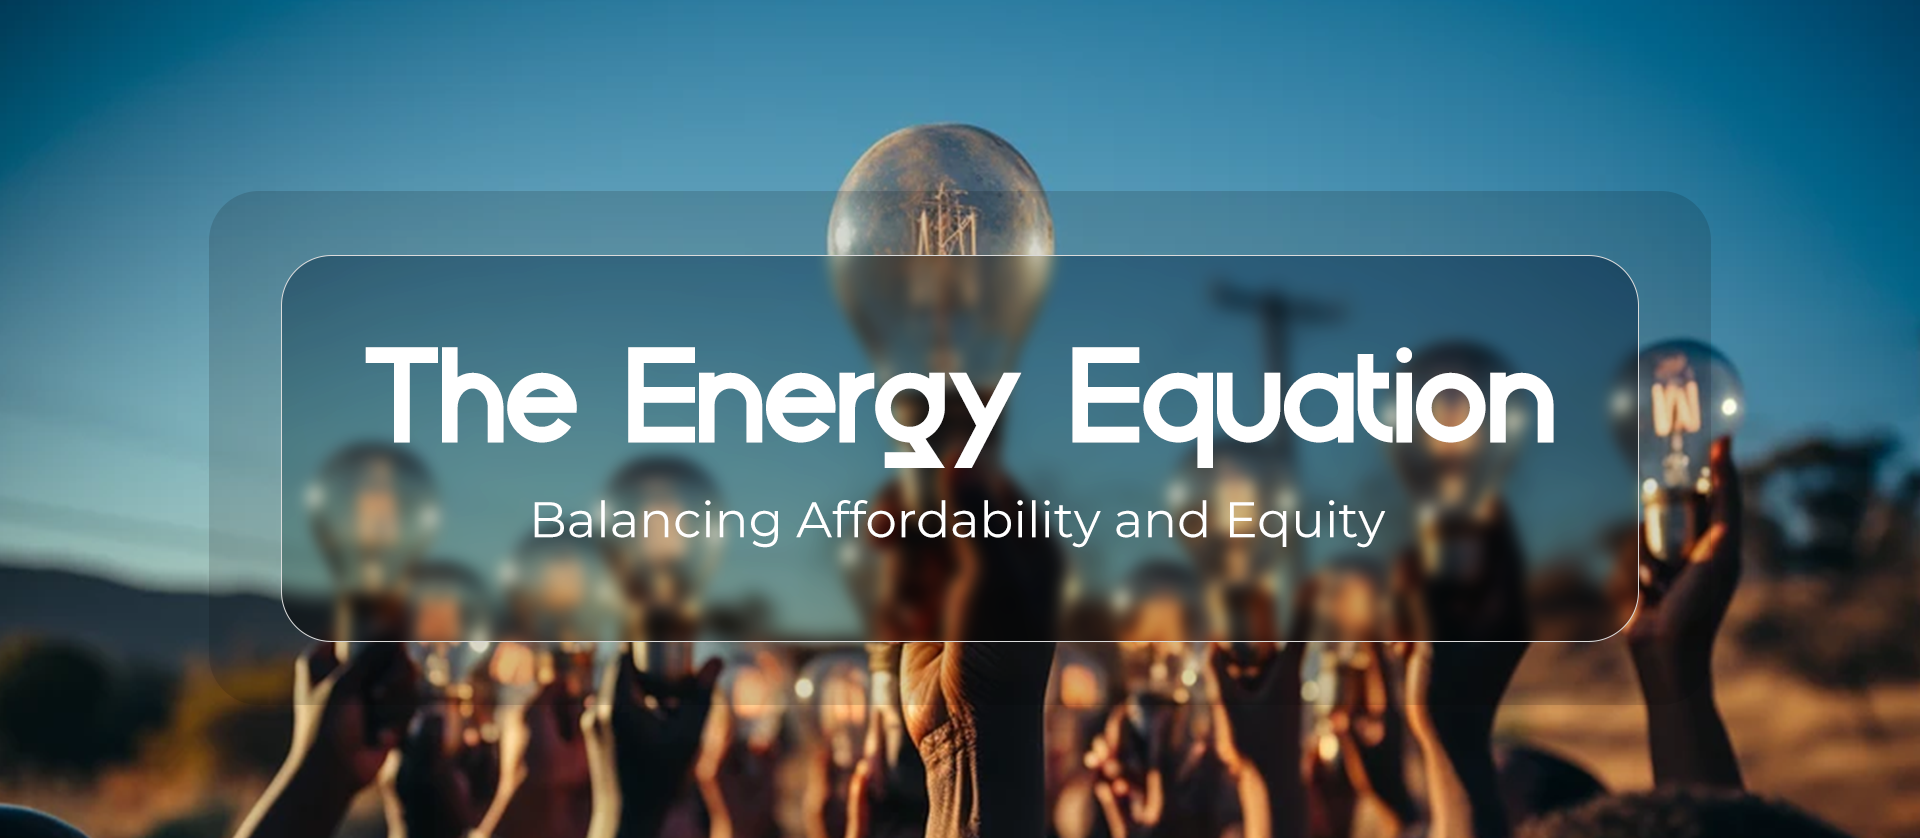 The Energy Equation: